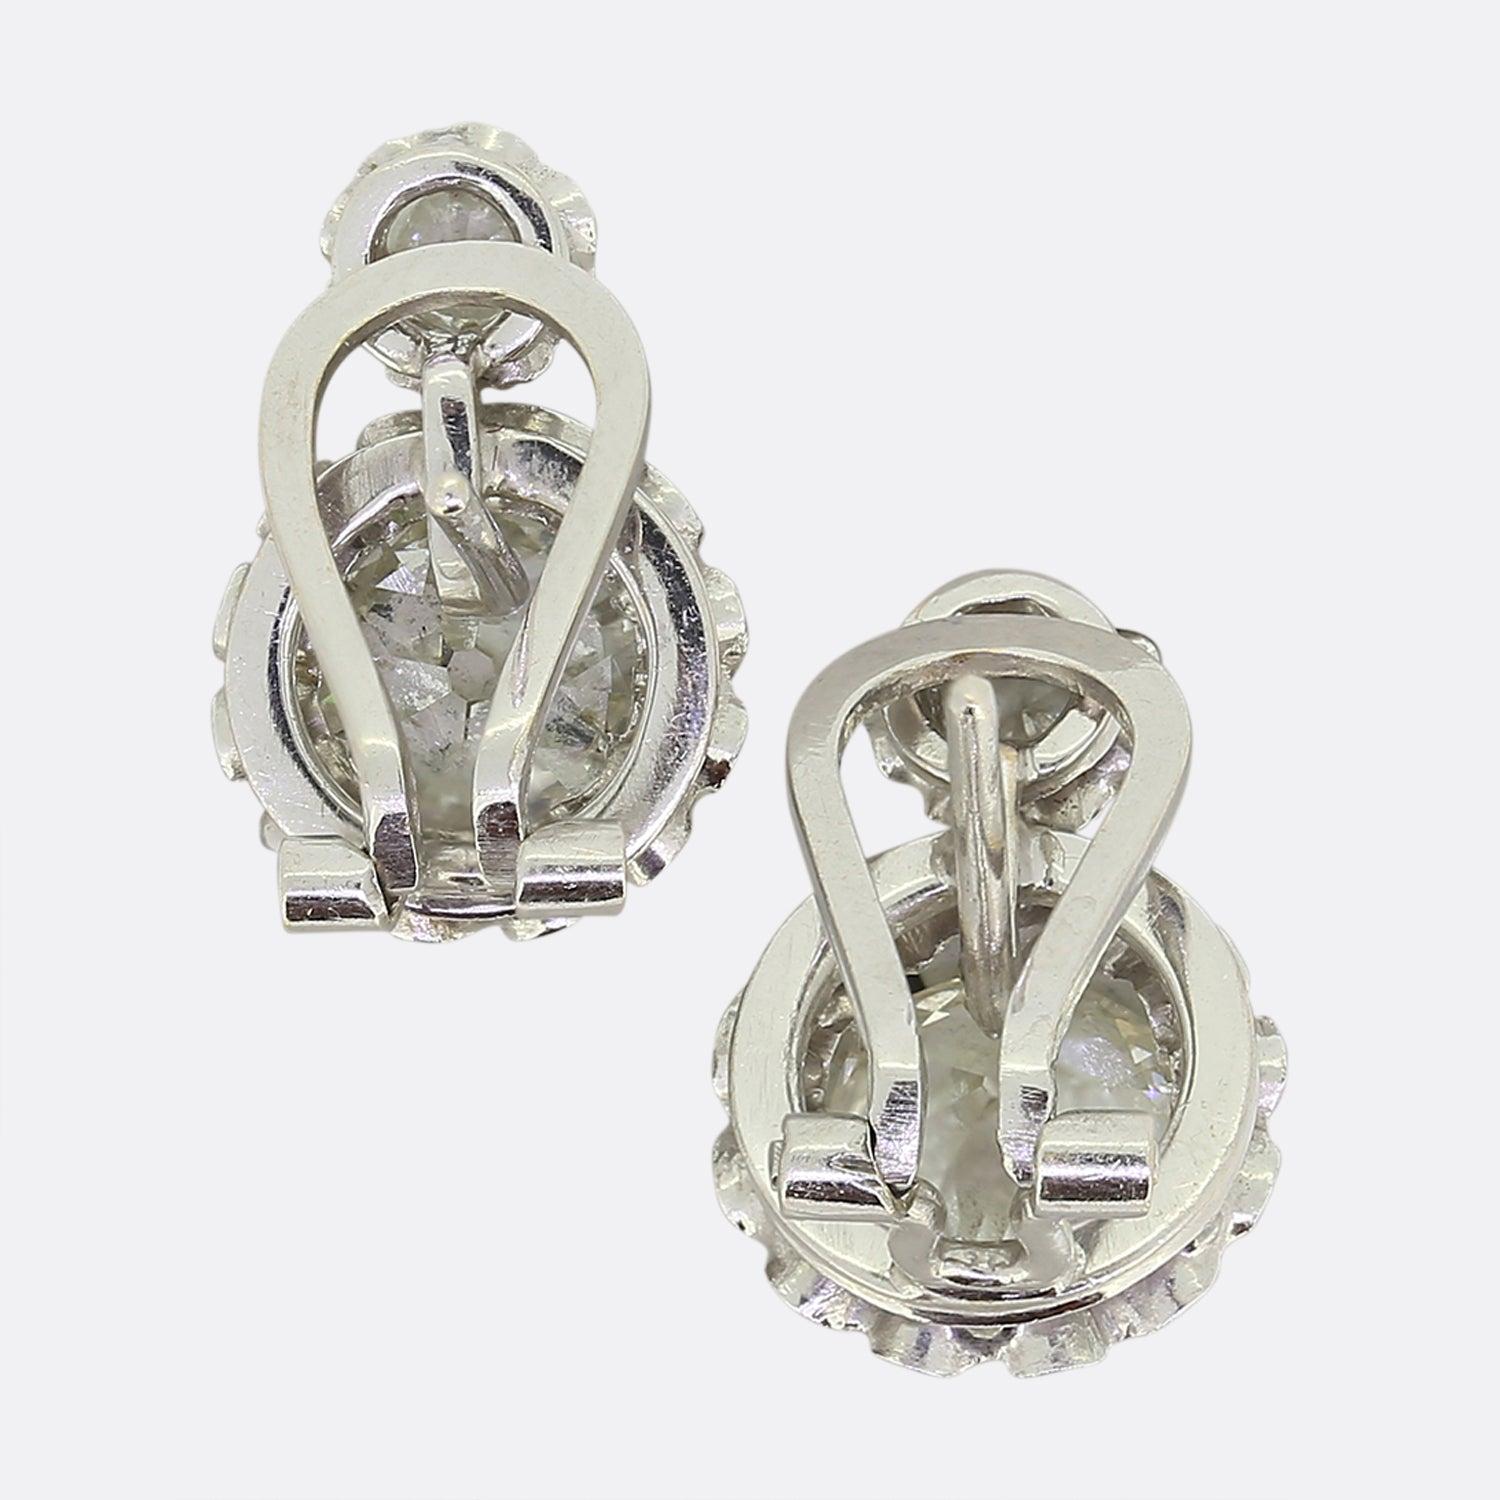 This is a wonderful pair of diamond earrings that date back to the 1950s. Each earring features a small and large old cut diamond that are illusion set in platinum to make them appear even larger. The diamonds are well matched and beautiful chunky